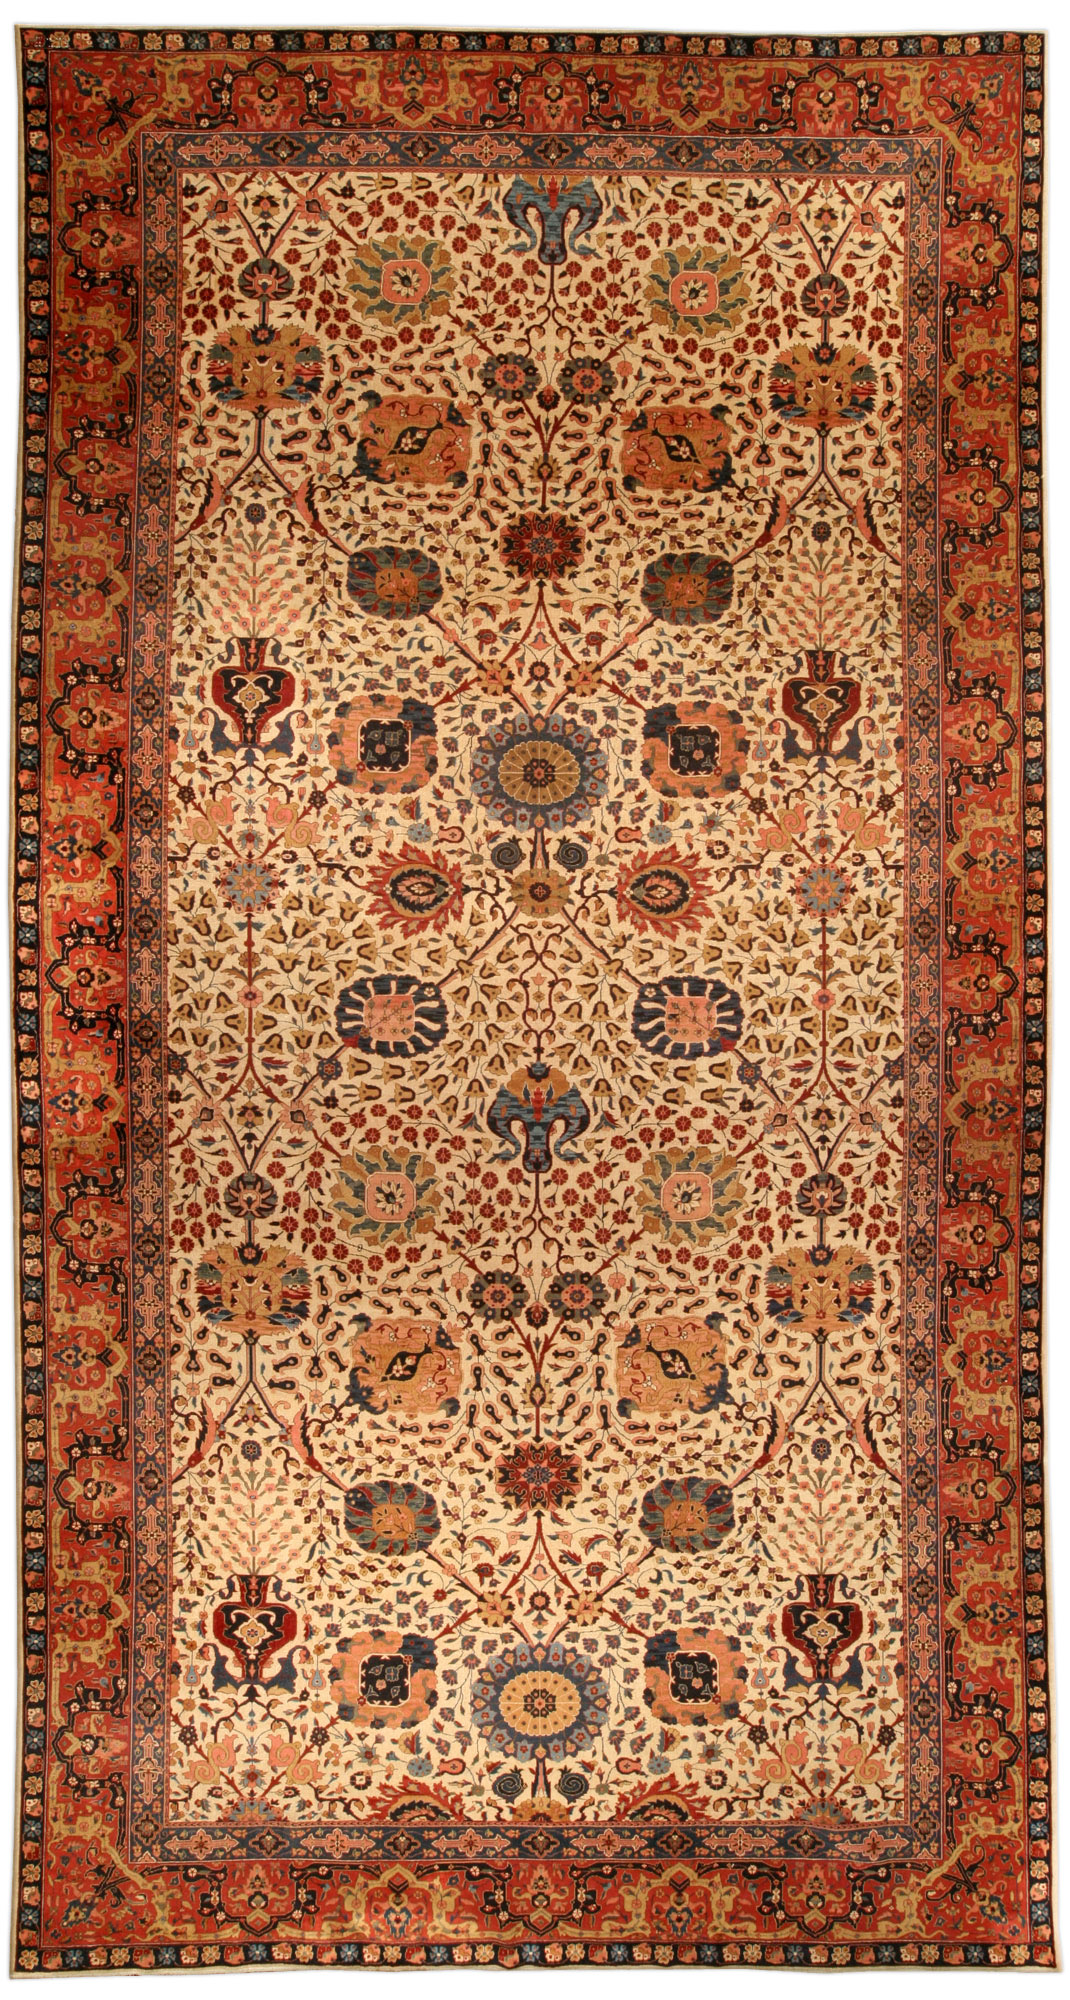 North Indian Rugs & Carpets For Sale (Antique Oriental Indian Rug) • NYC